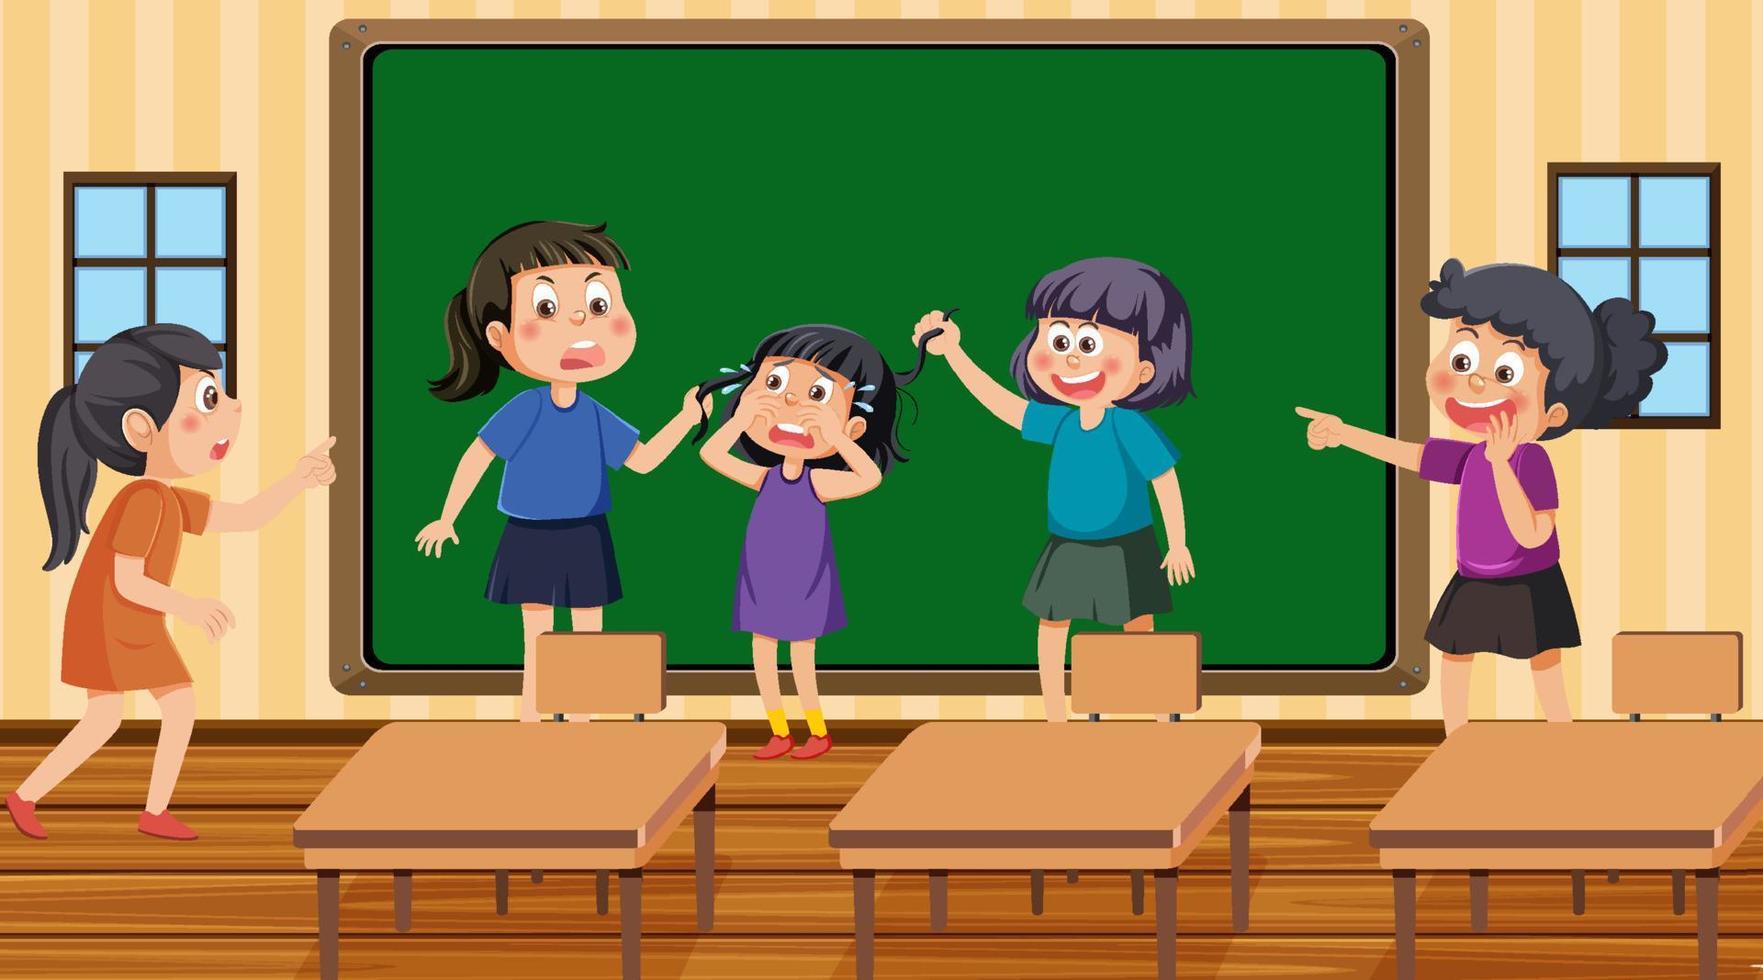 Kids bullying their friend at school vector